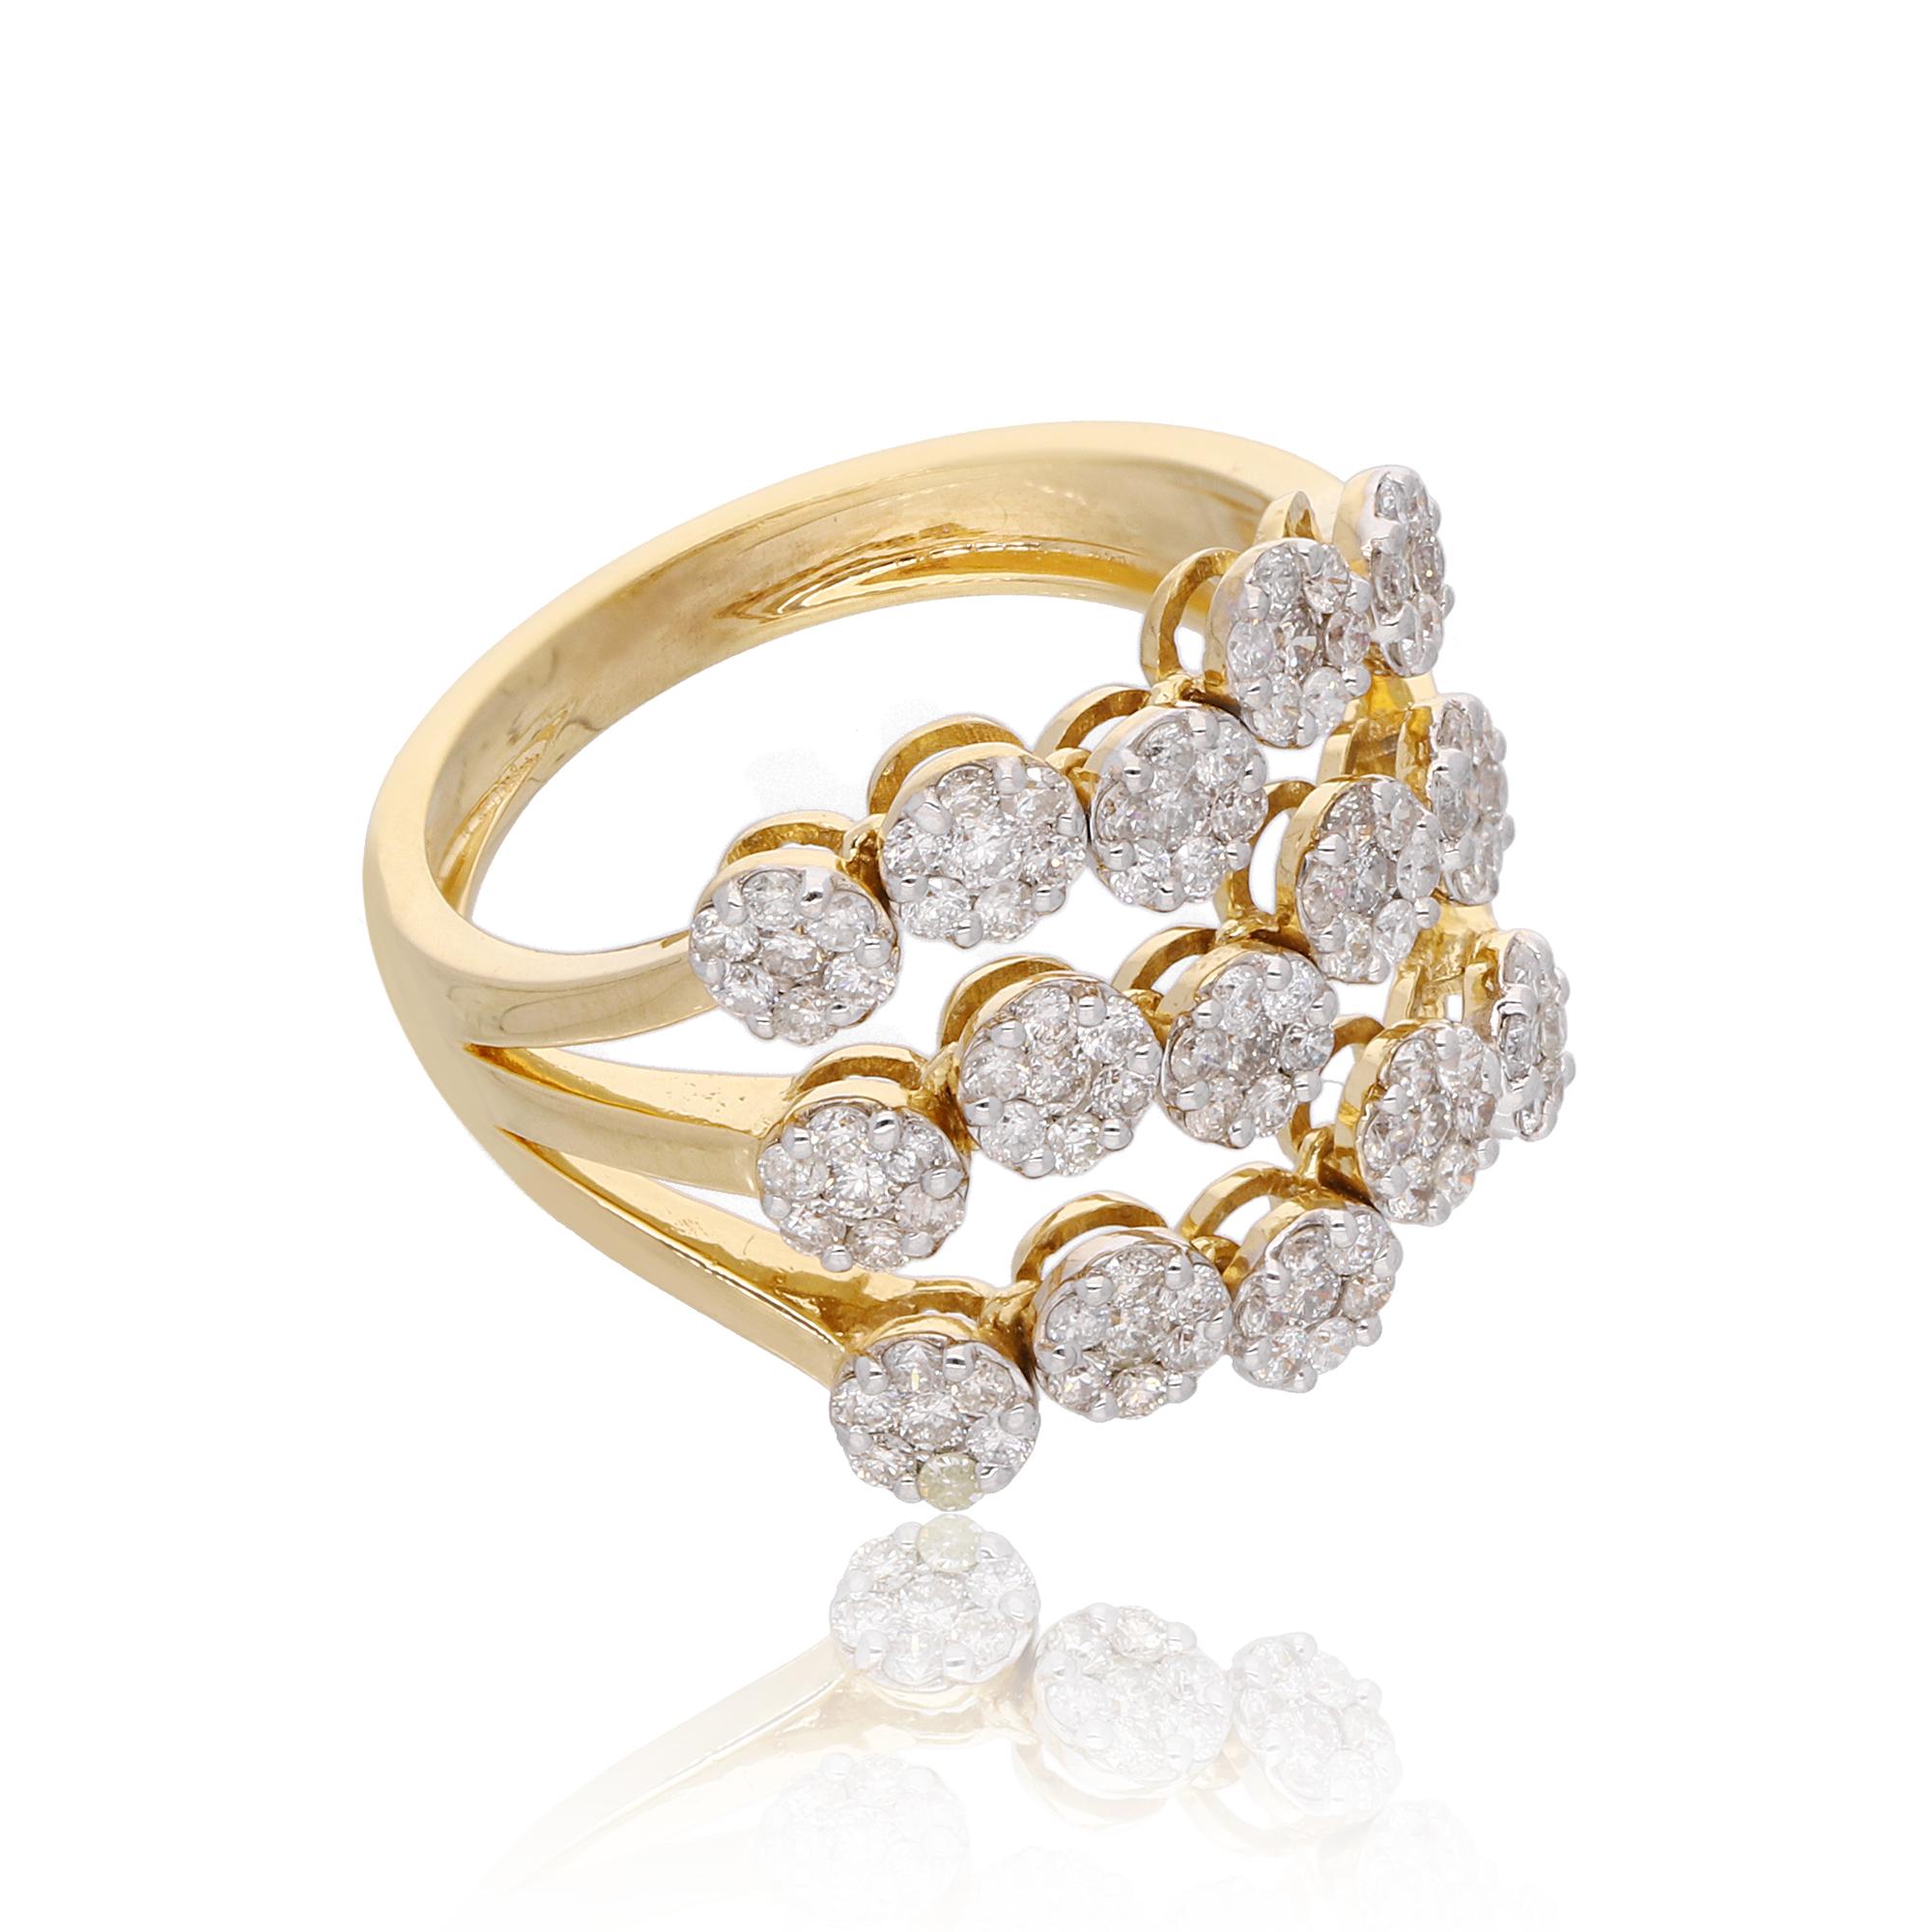 For Sale:  1.05 Carat SI Clarity HI Color Round Diamond Ring 18 Karat Yellow Gold Jewelry 3